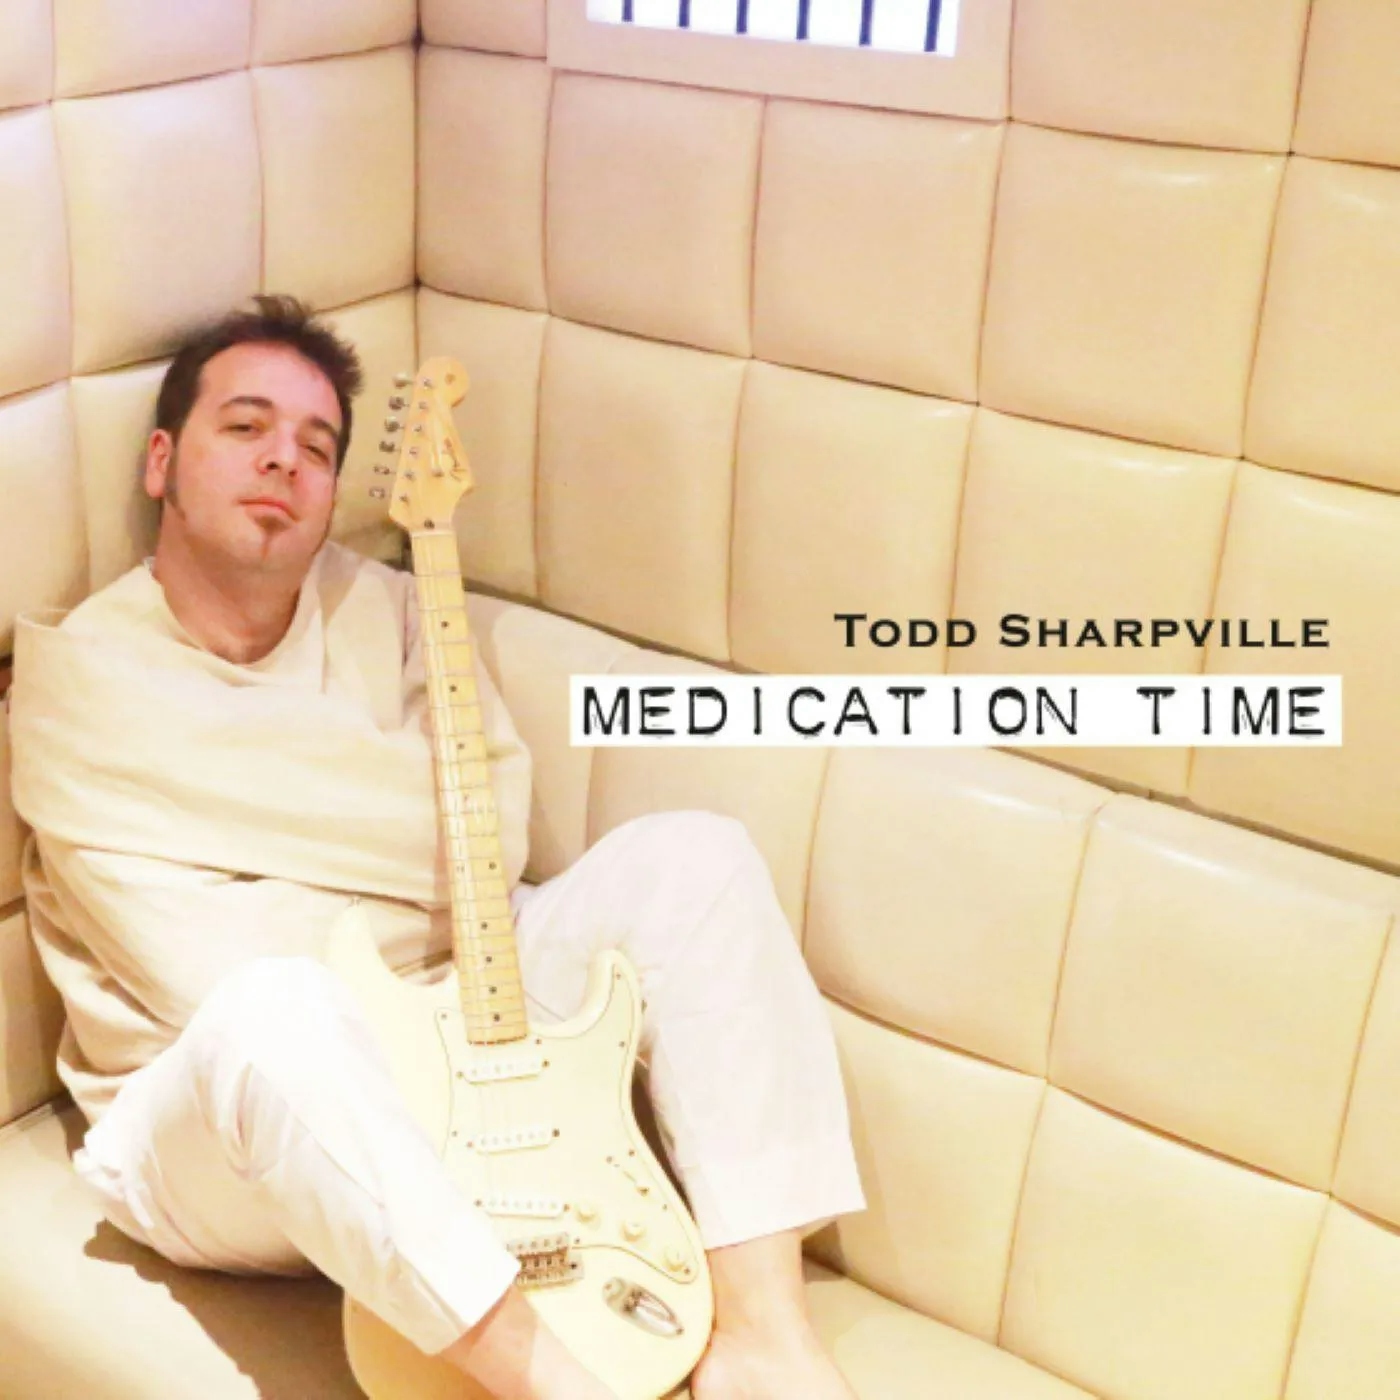 Album artwork for Medication Time by Todd Sharpville